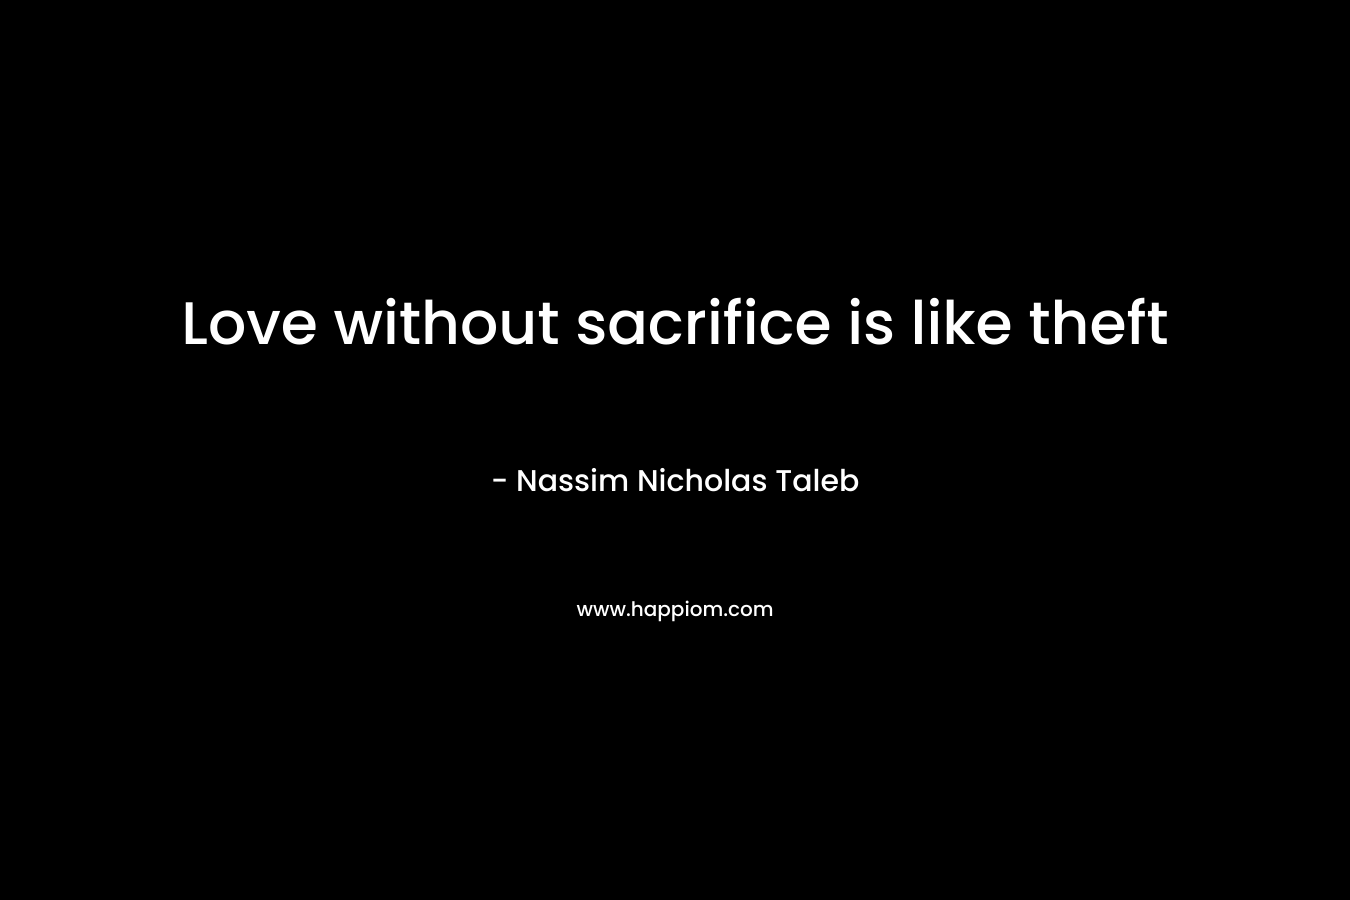 Love without sacrifice is like theft